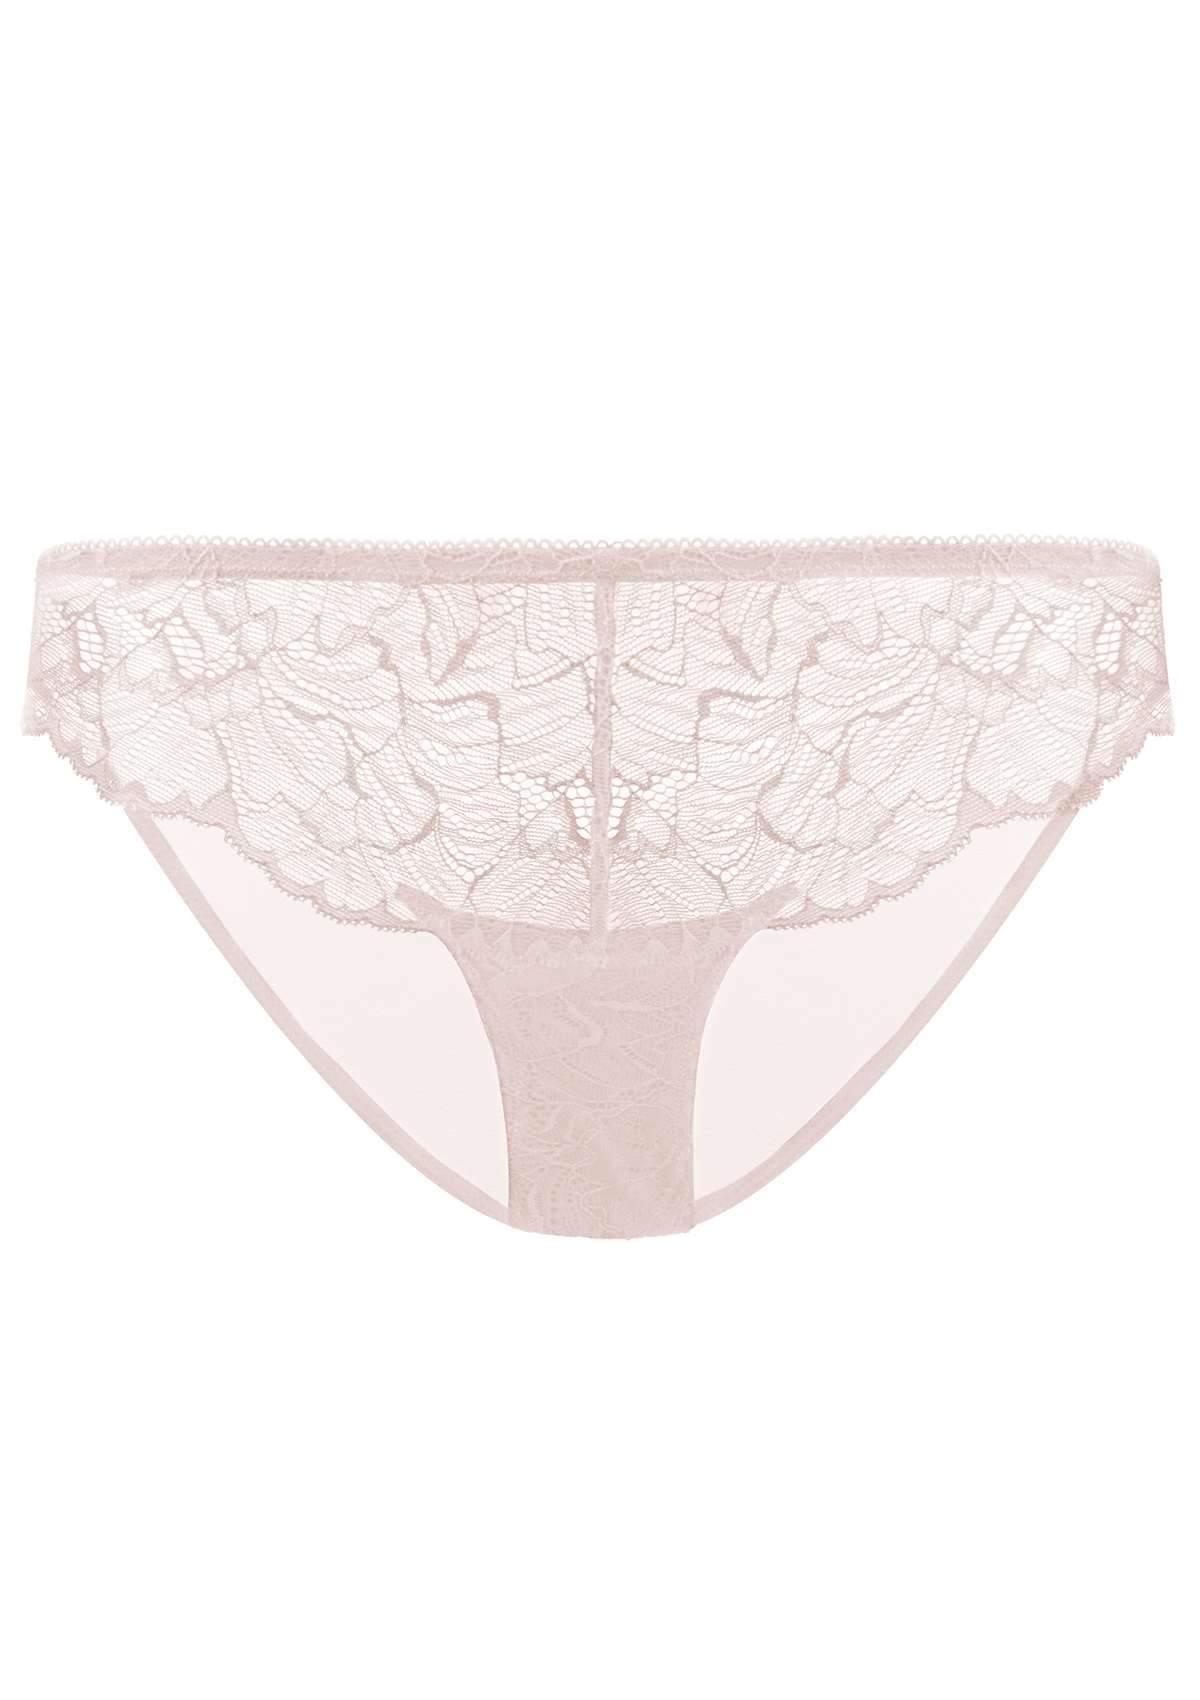 HSIA Blossom Mid-Rise Front Lace Mesh Back Everyday Pantie  - XL / Dark Pink / High-Rise Brief